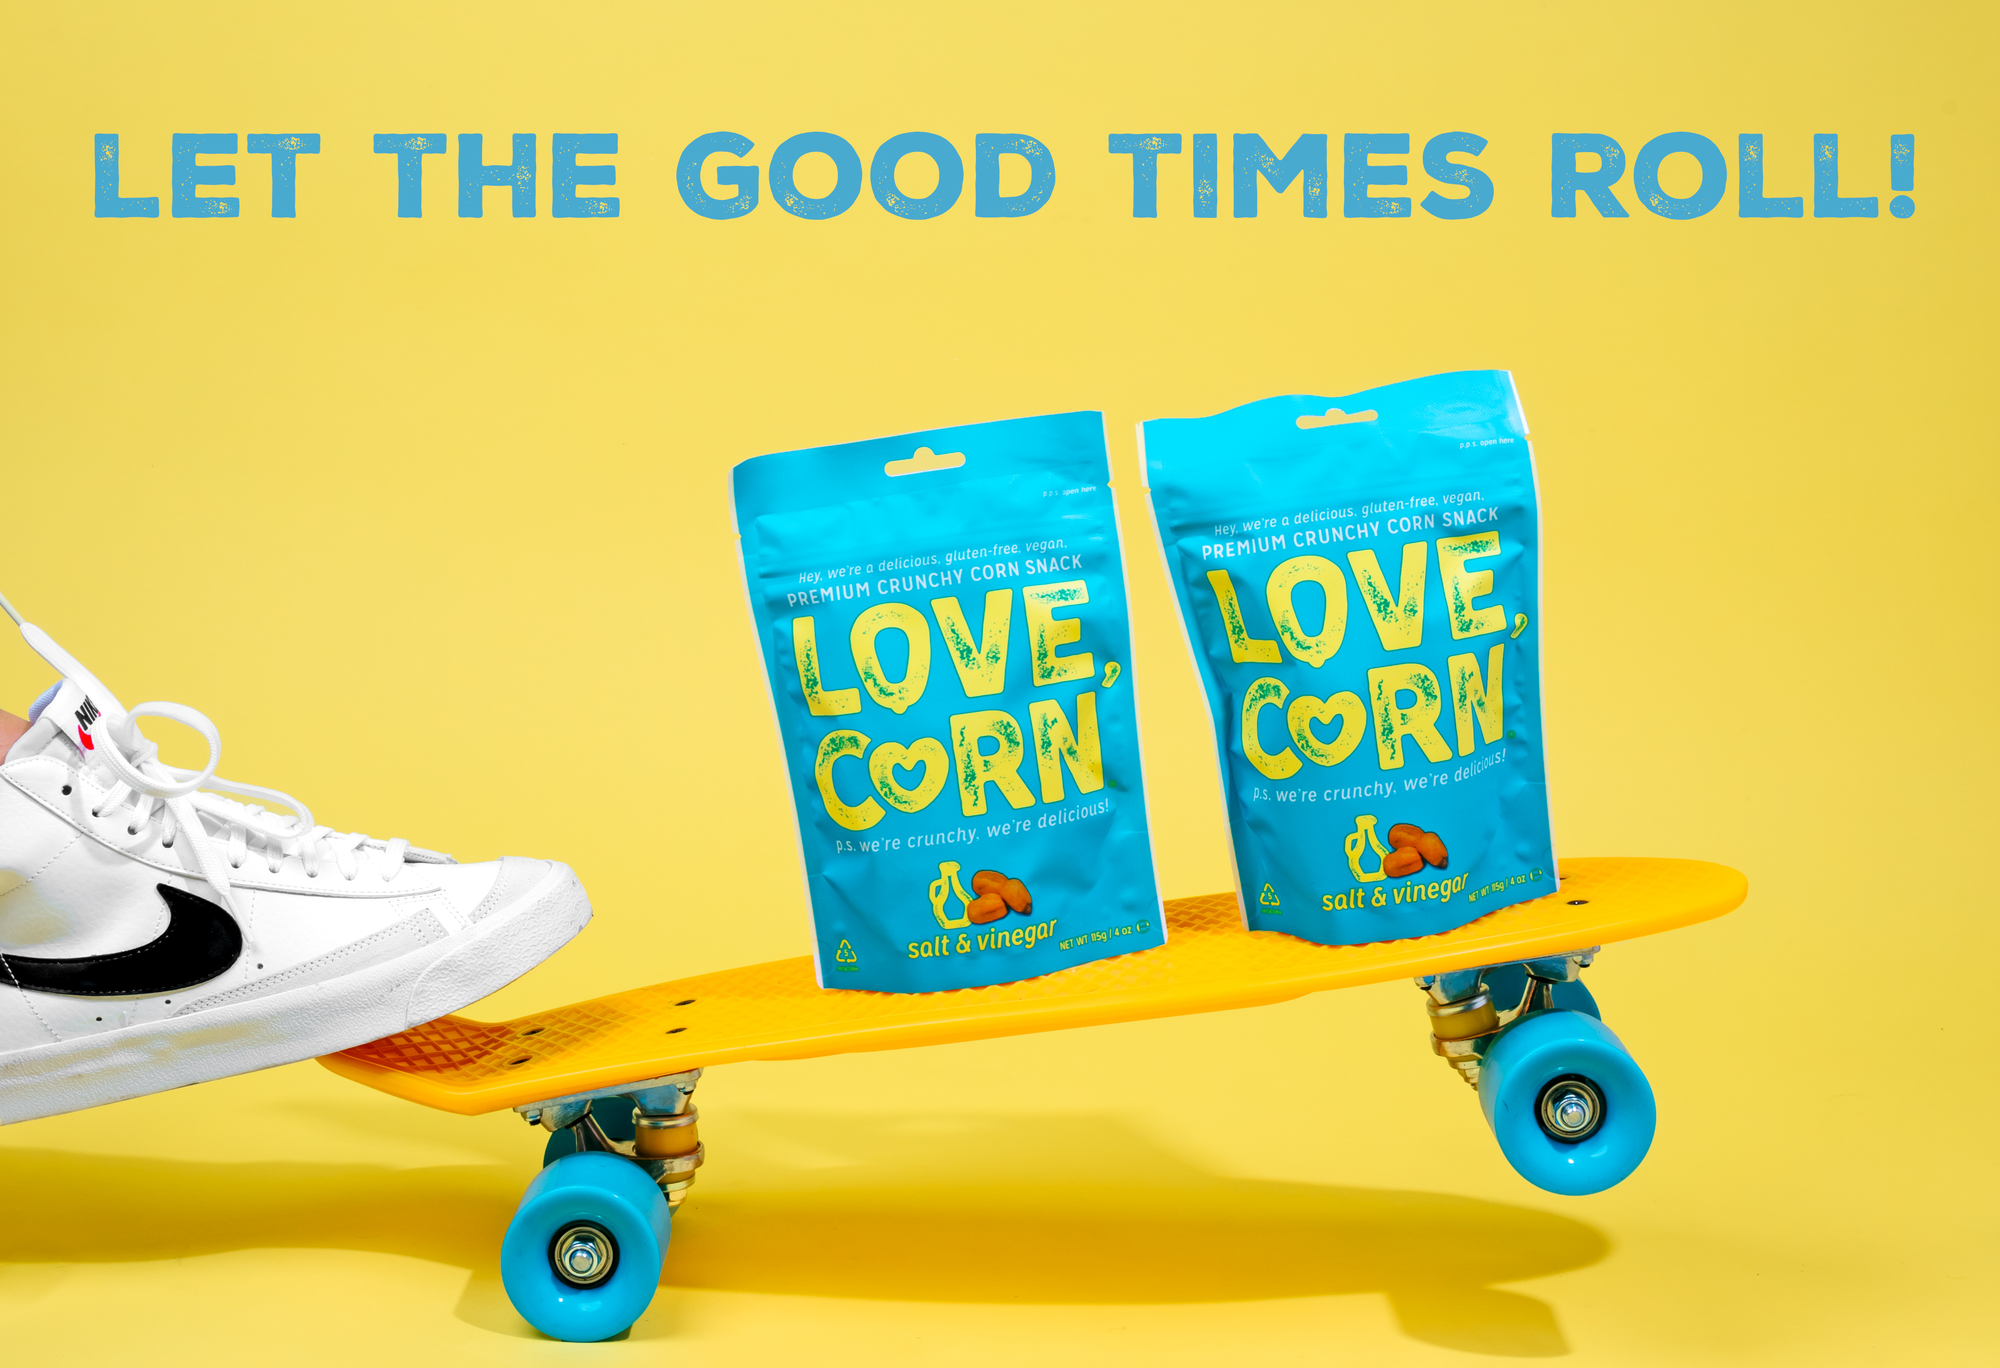 Let the good times roll, a feel-good playlist by us!